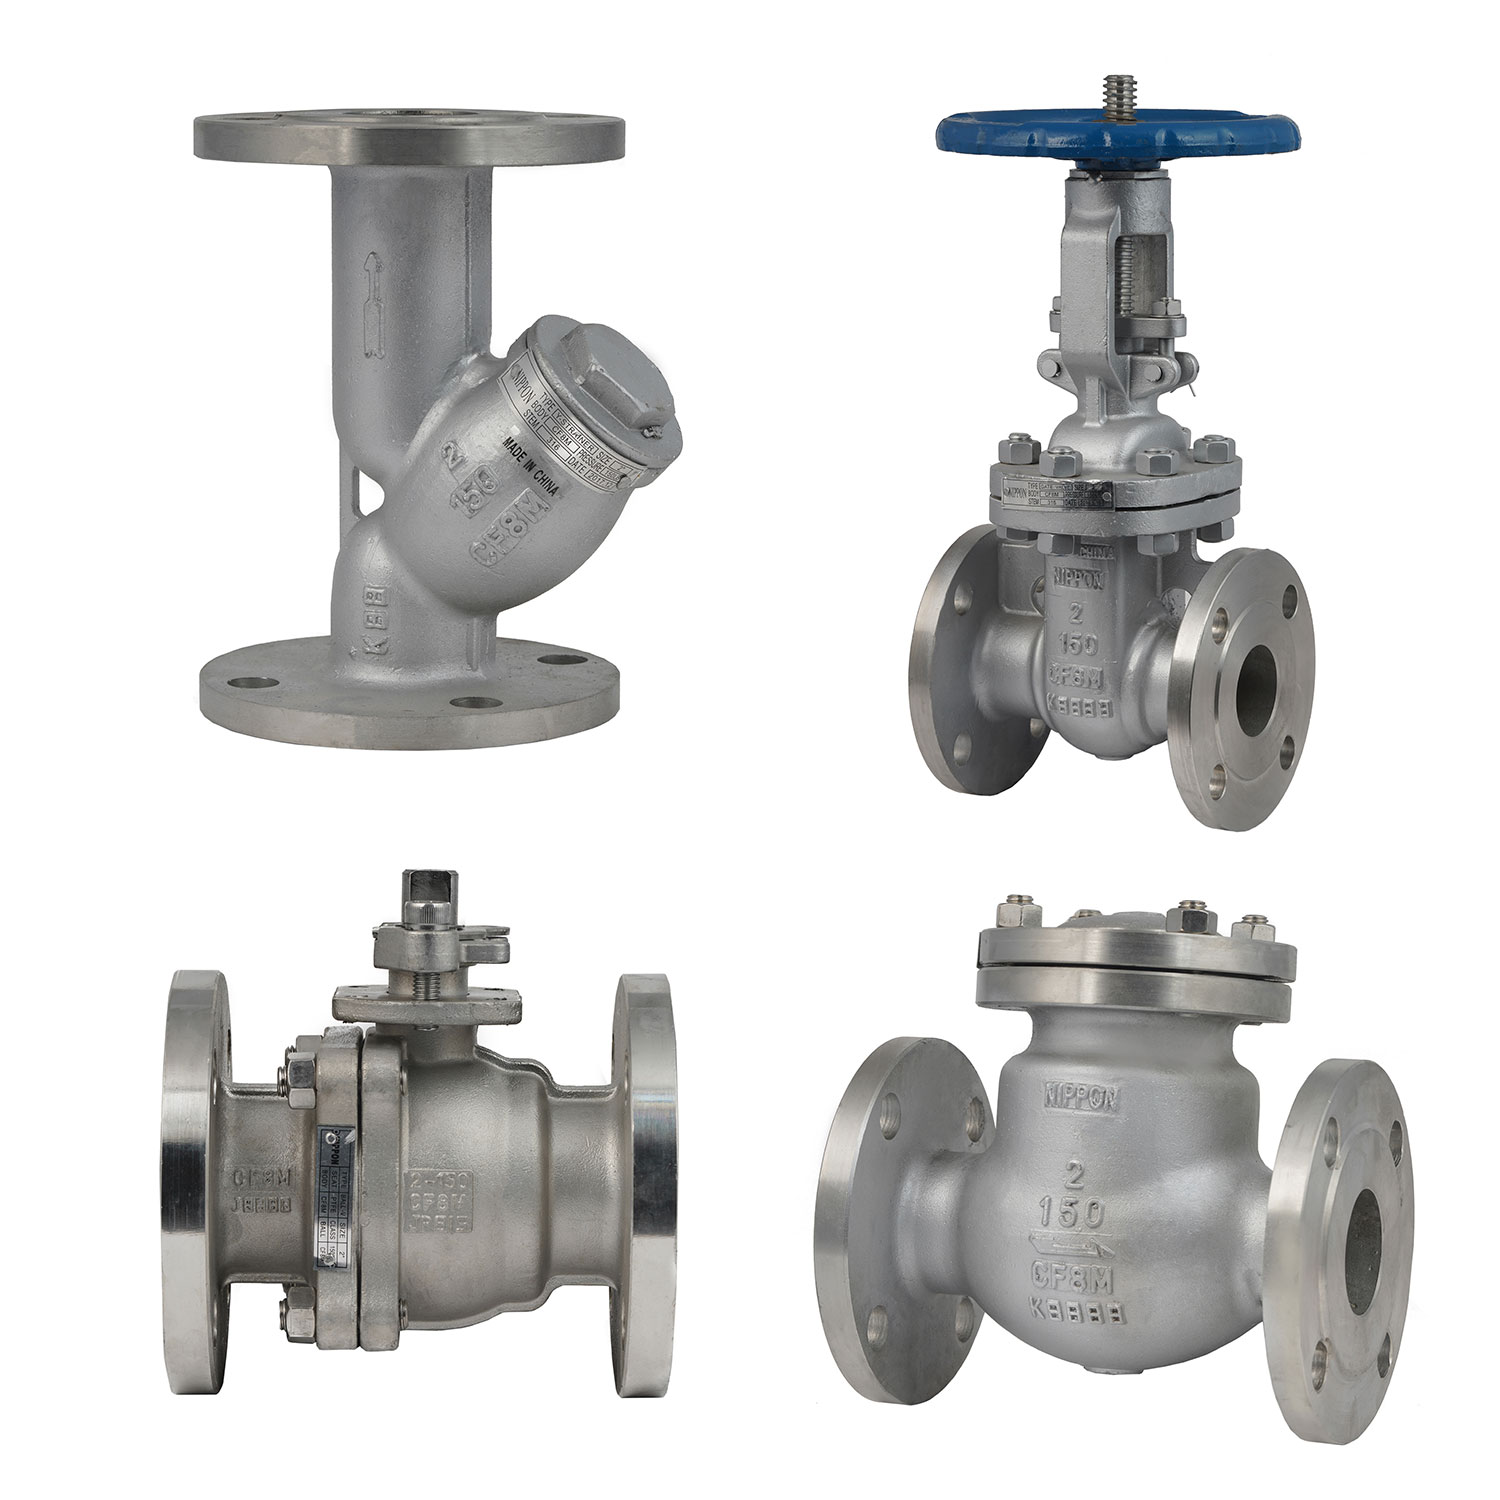 Class 300 Stainless Steel (CF8M) Flanged End Valves with (NIPPON-KITZ-KITZ STEEL) Brands